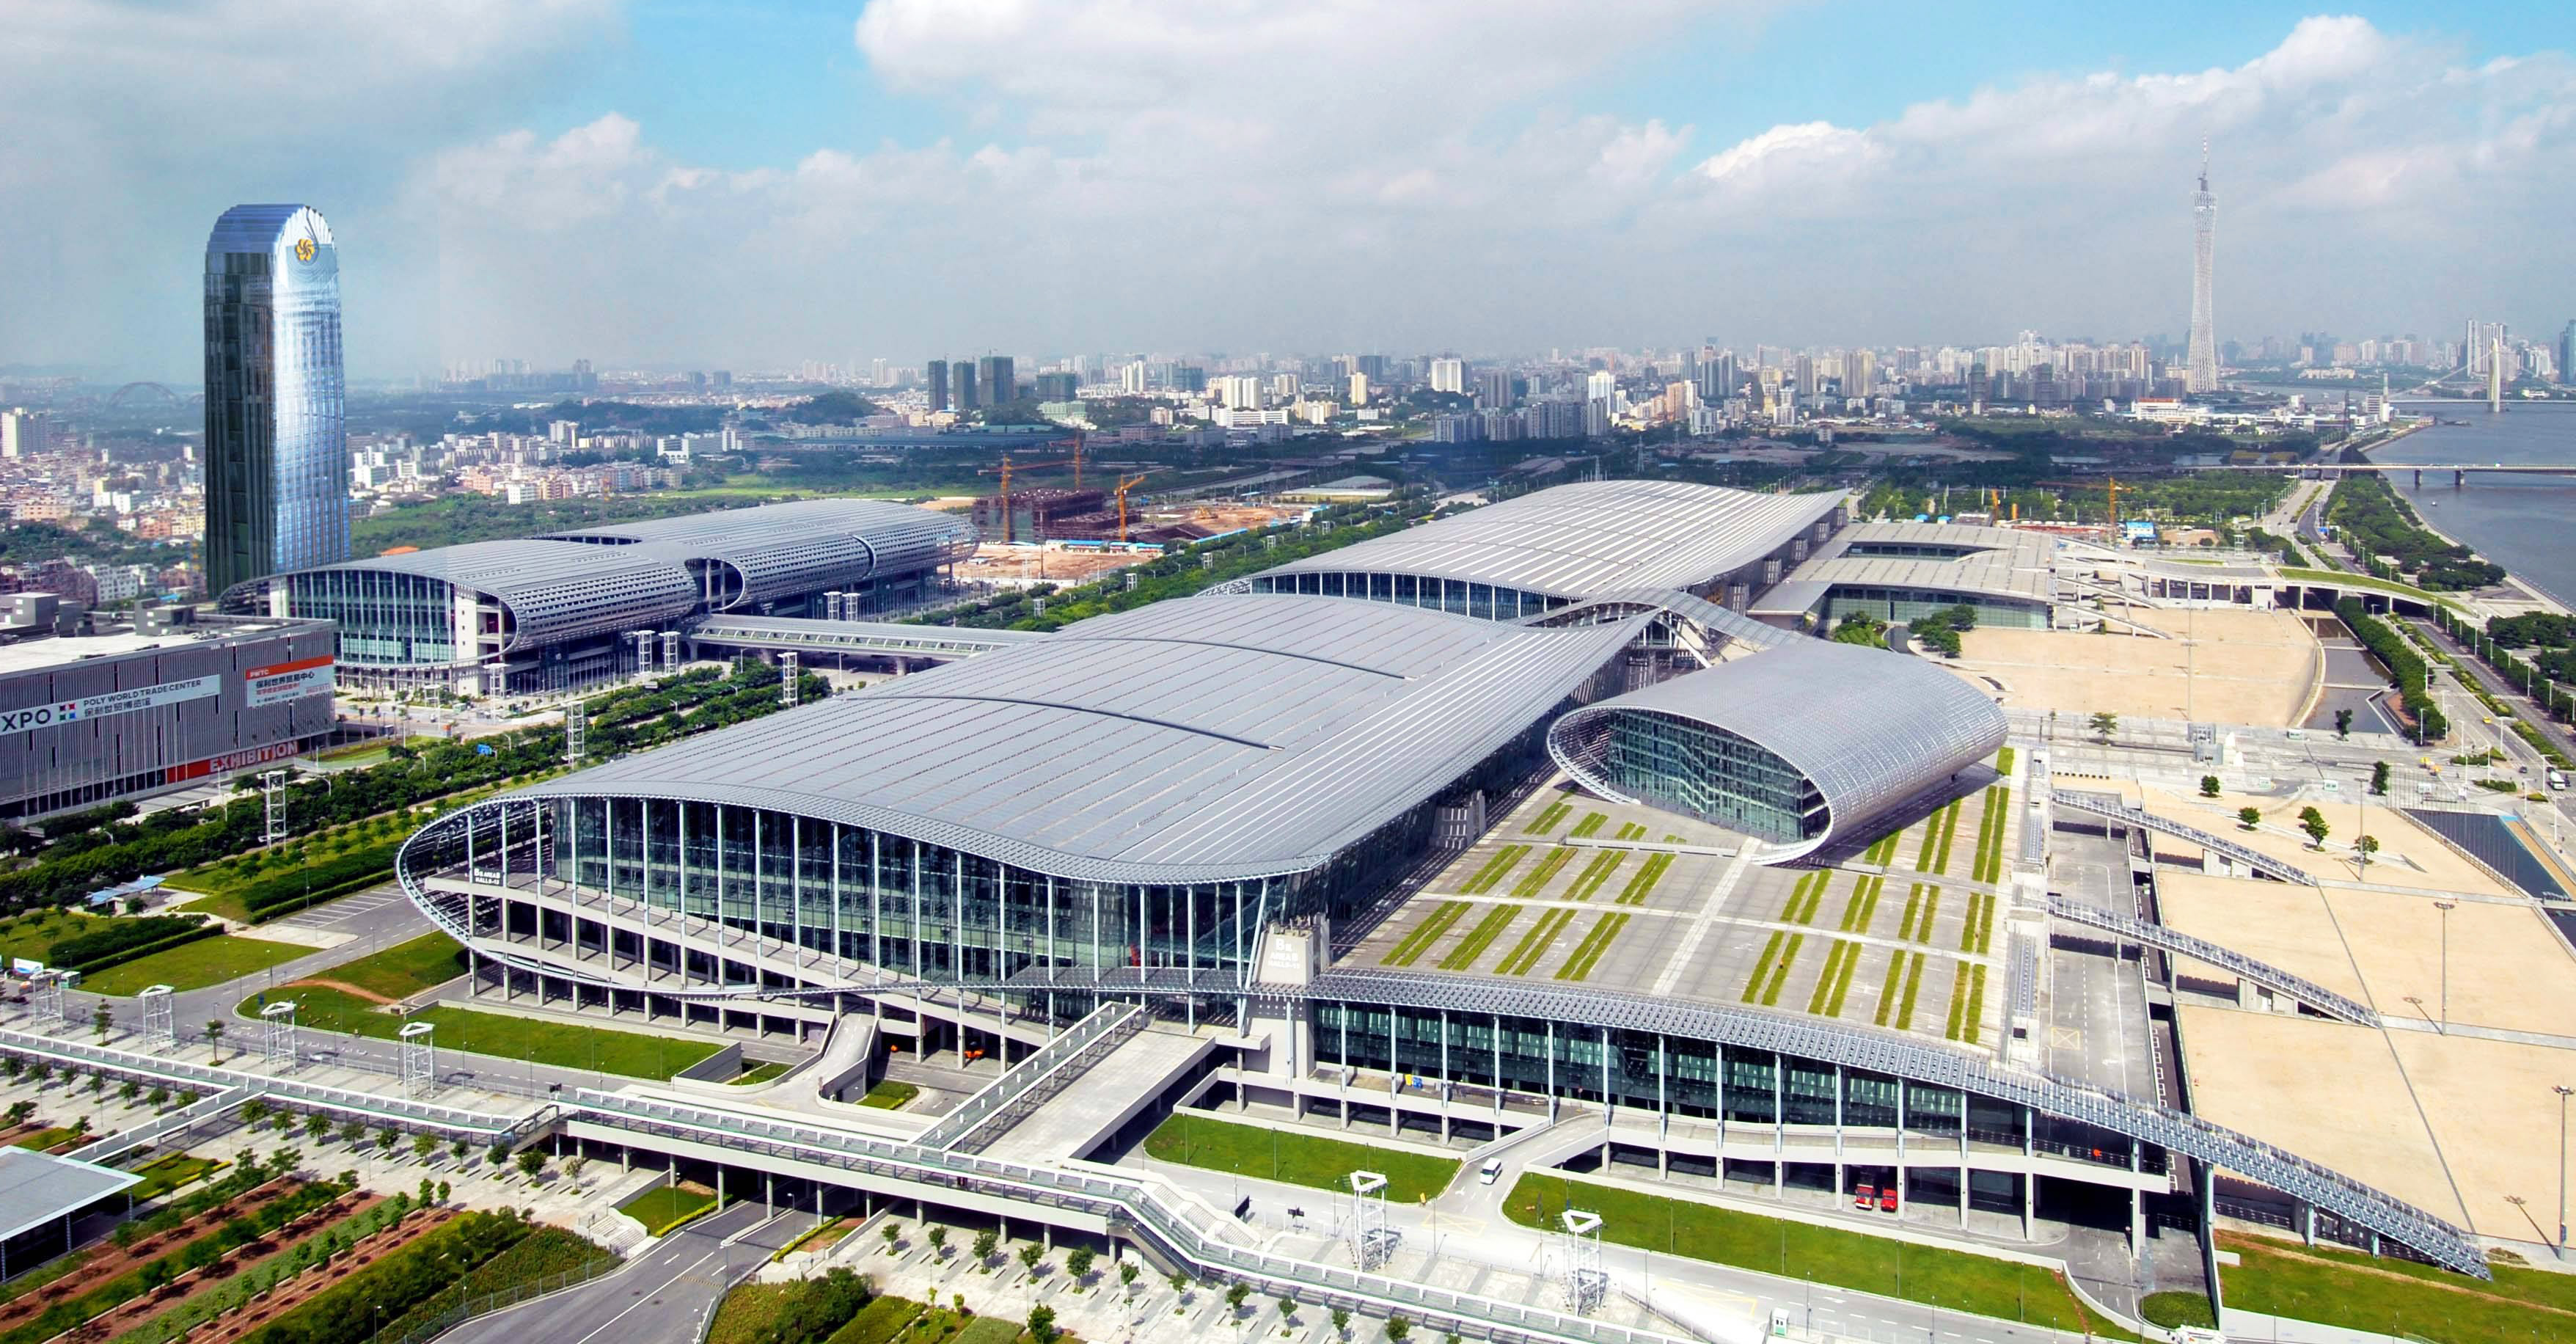 Sunray power invites you to meet at the 129th Canton Fair